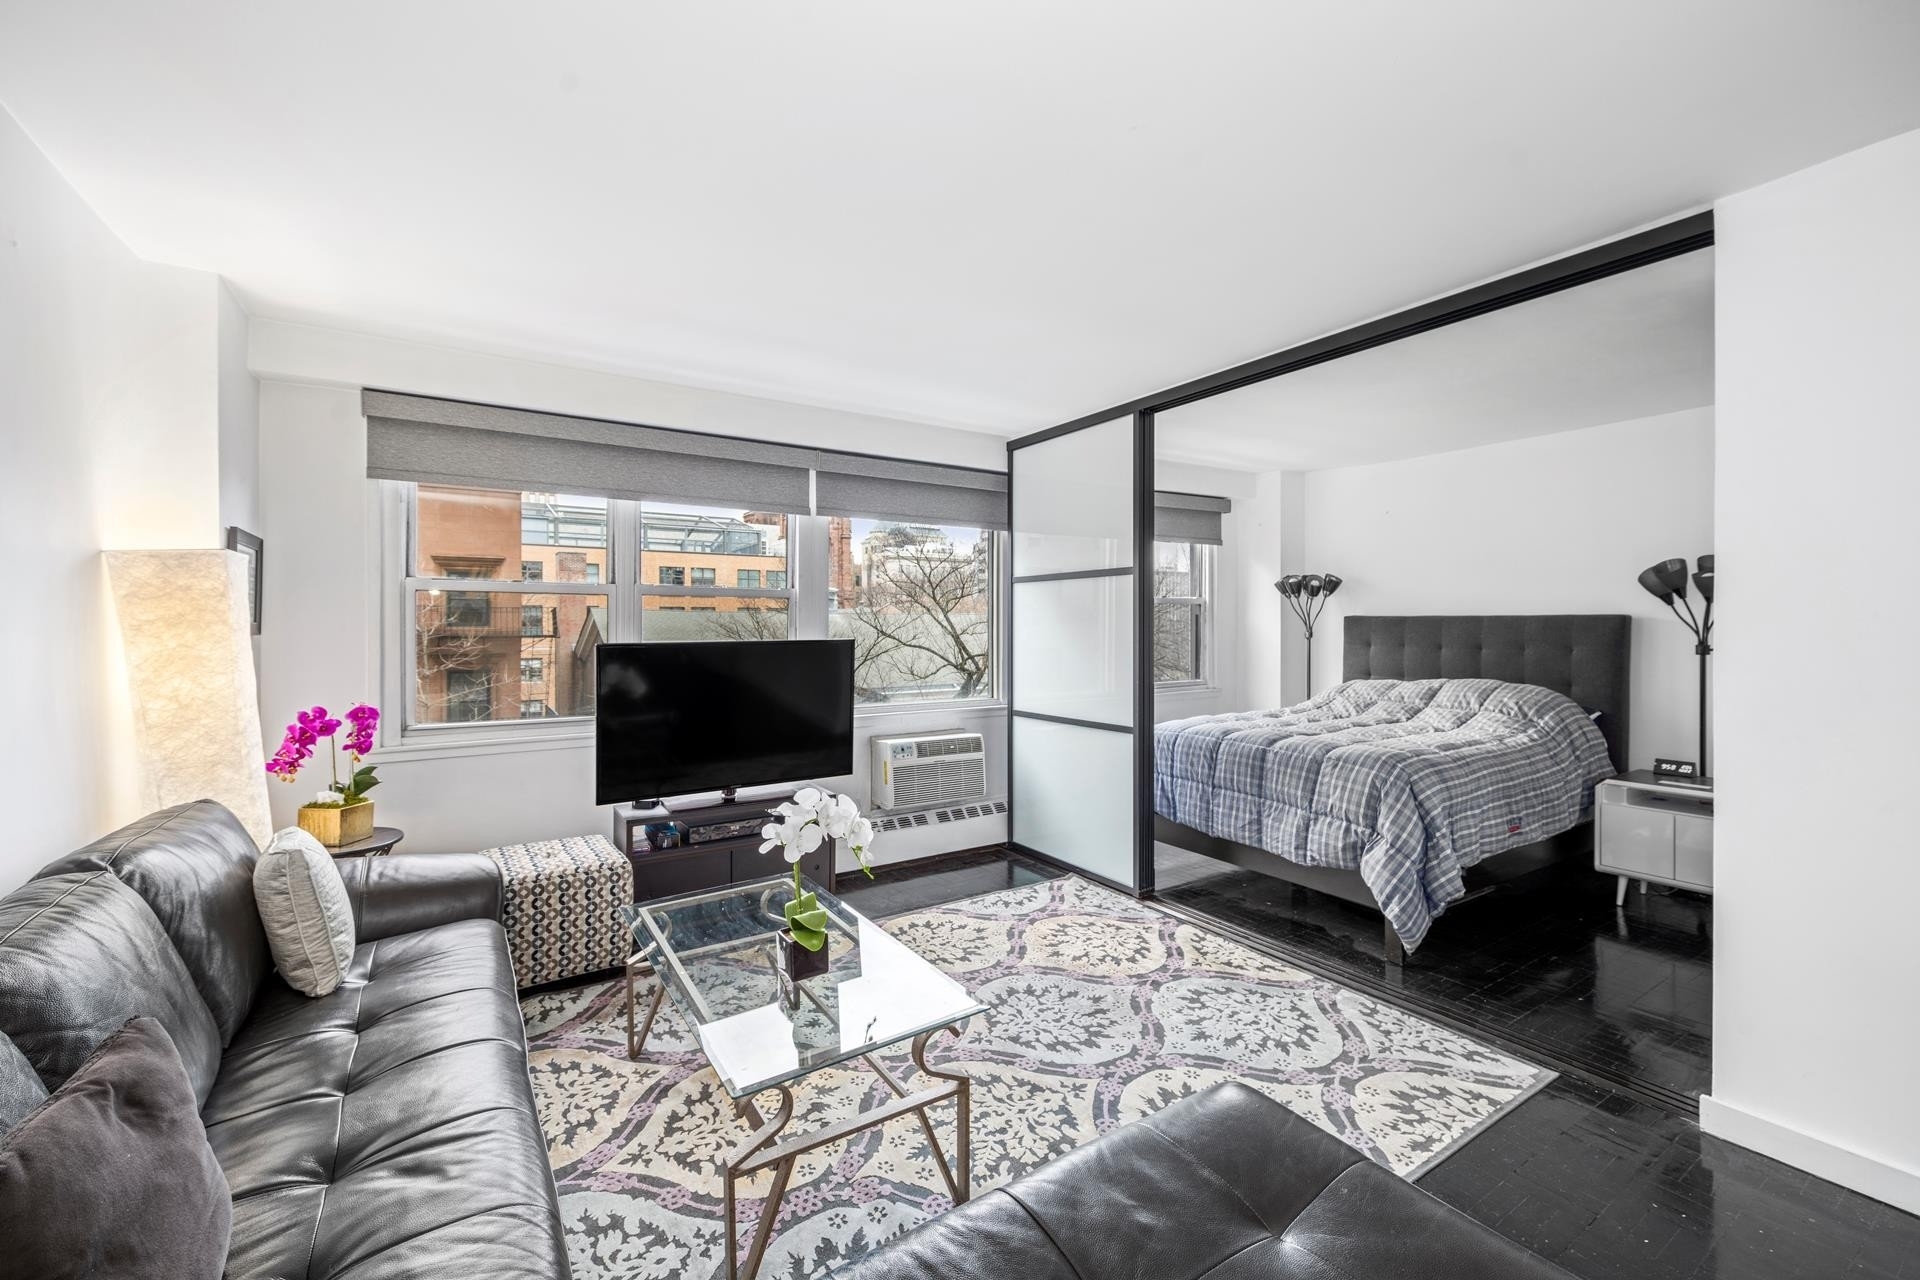 Co-op Properties for Sale at Parc Fifteen, 210 E 15TH ST, 6A Gramercy Park, New York, NY 10003